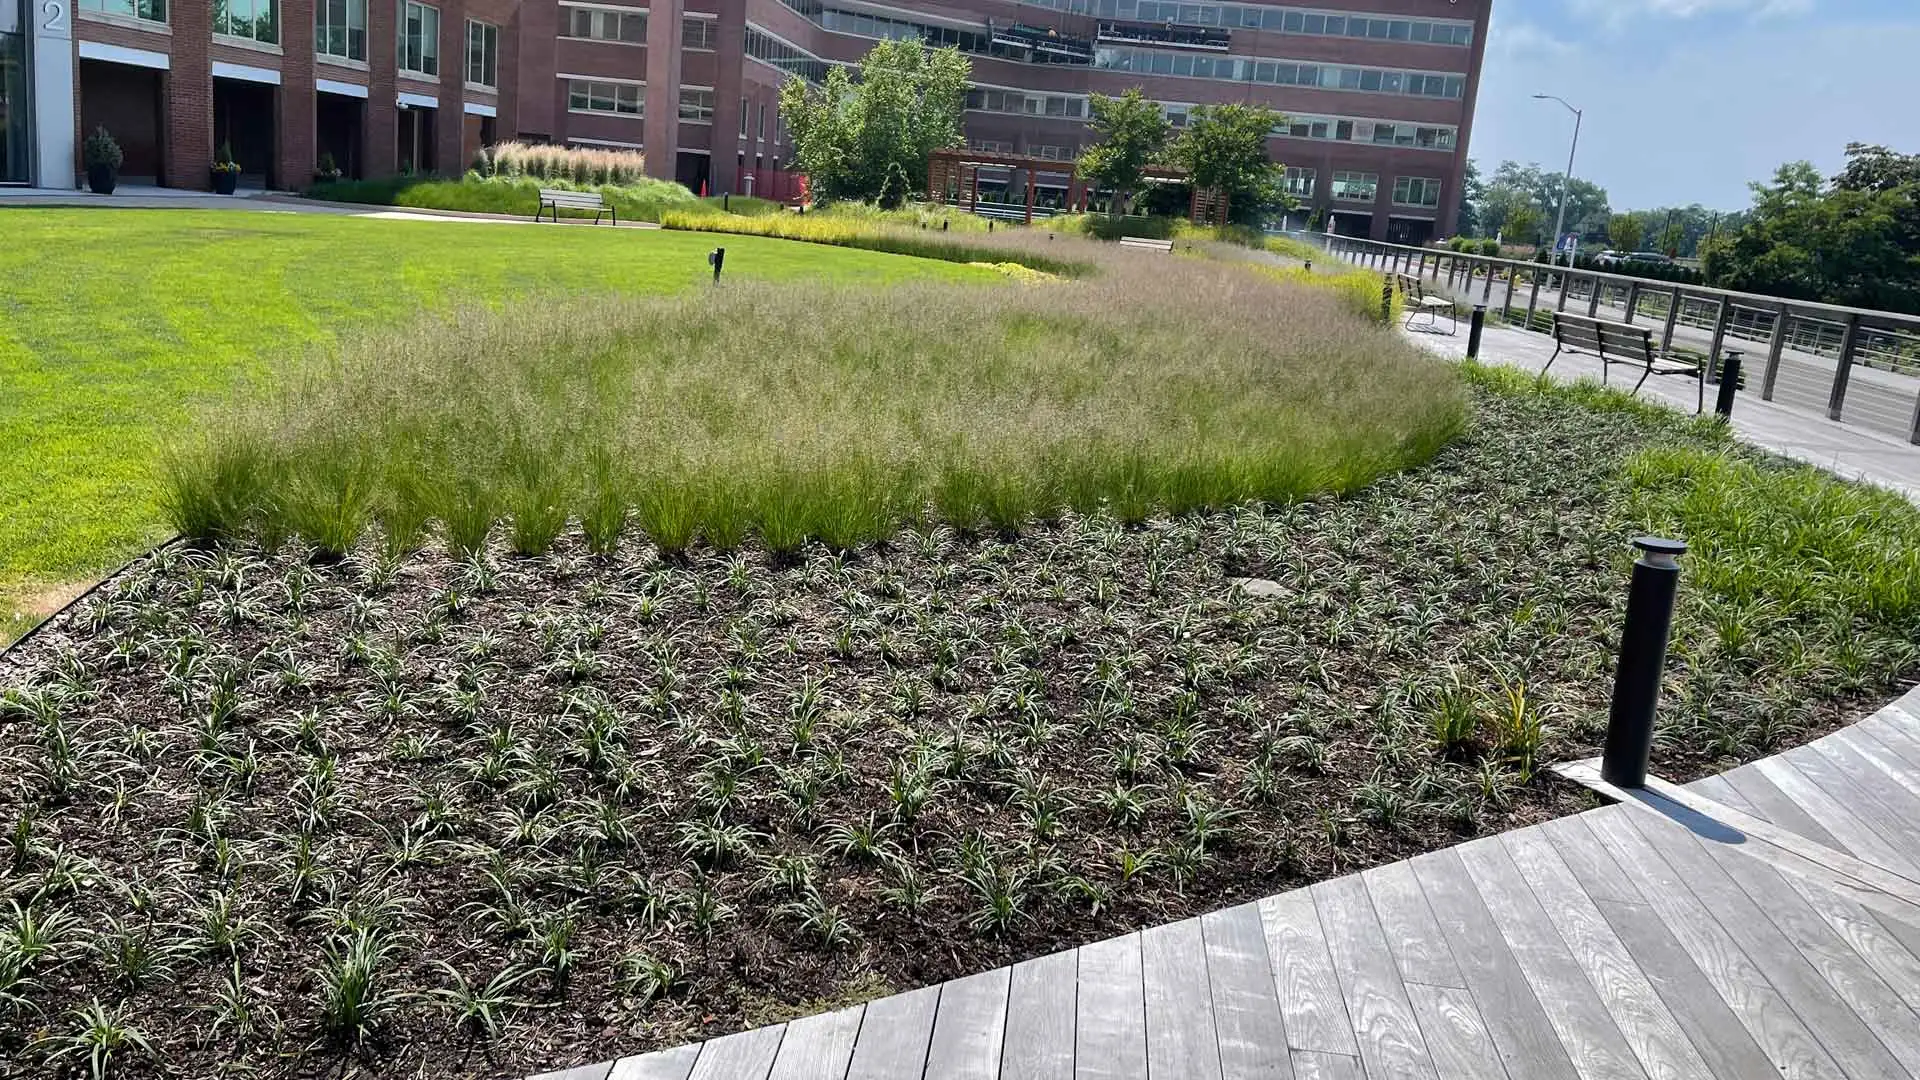 Landscape bed maintained by professionals for a corporate building in Manhattan, NY.